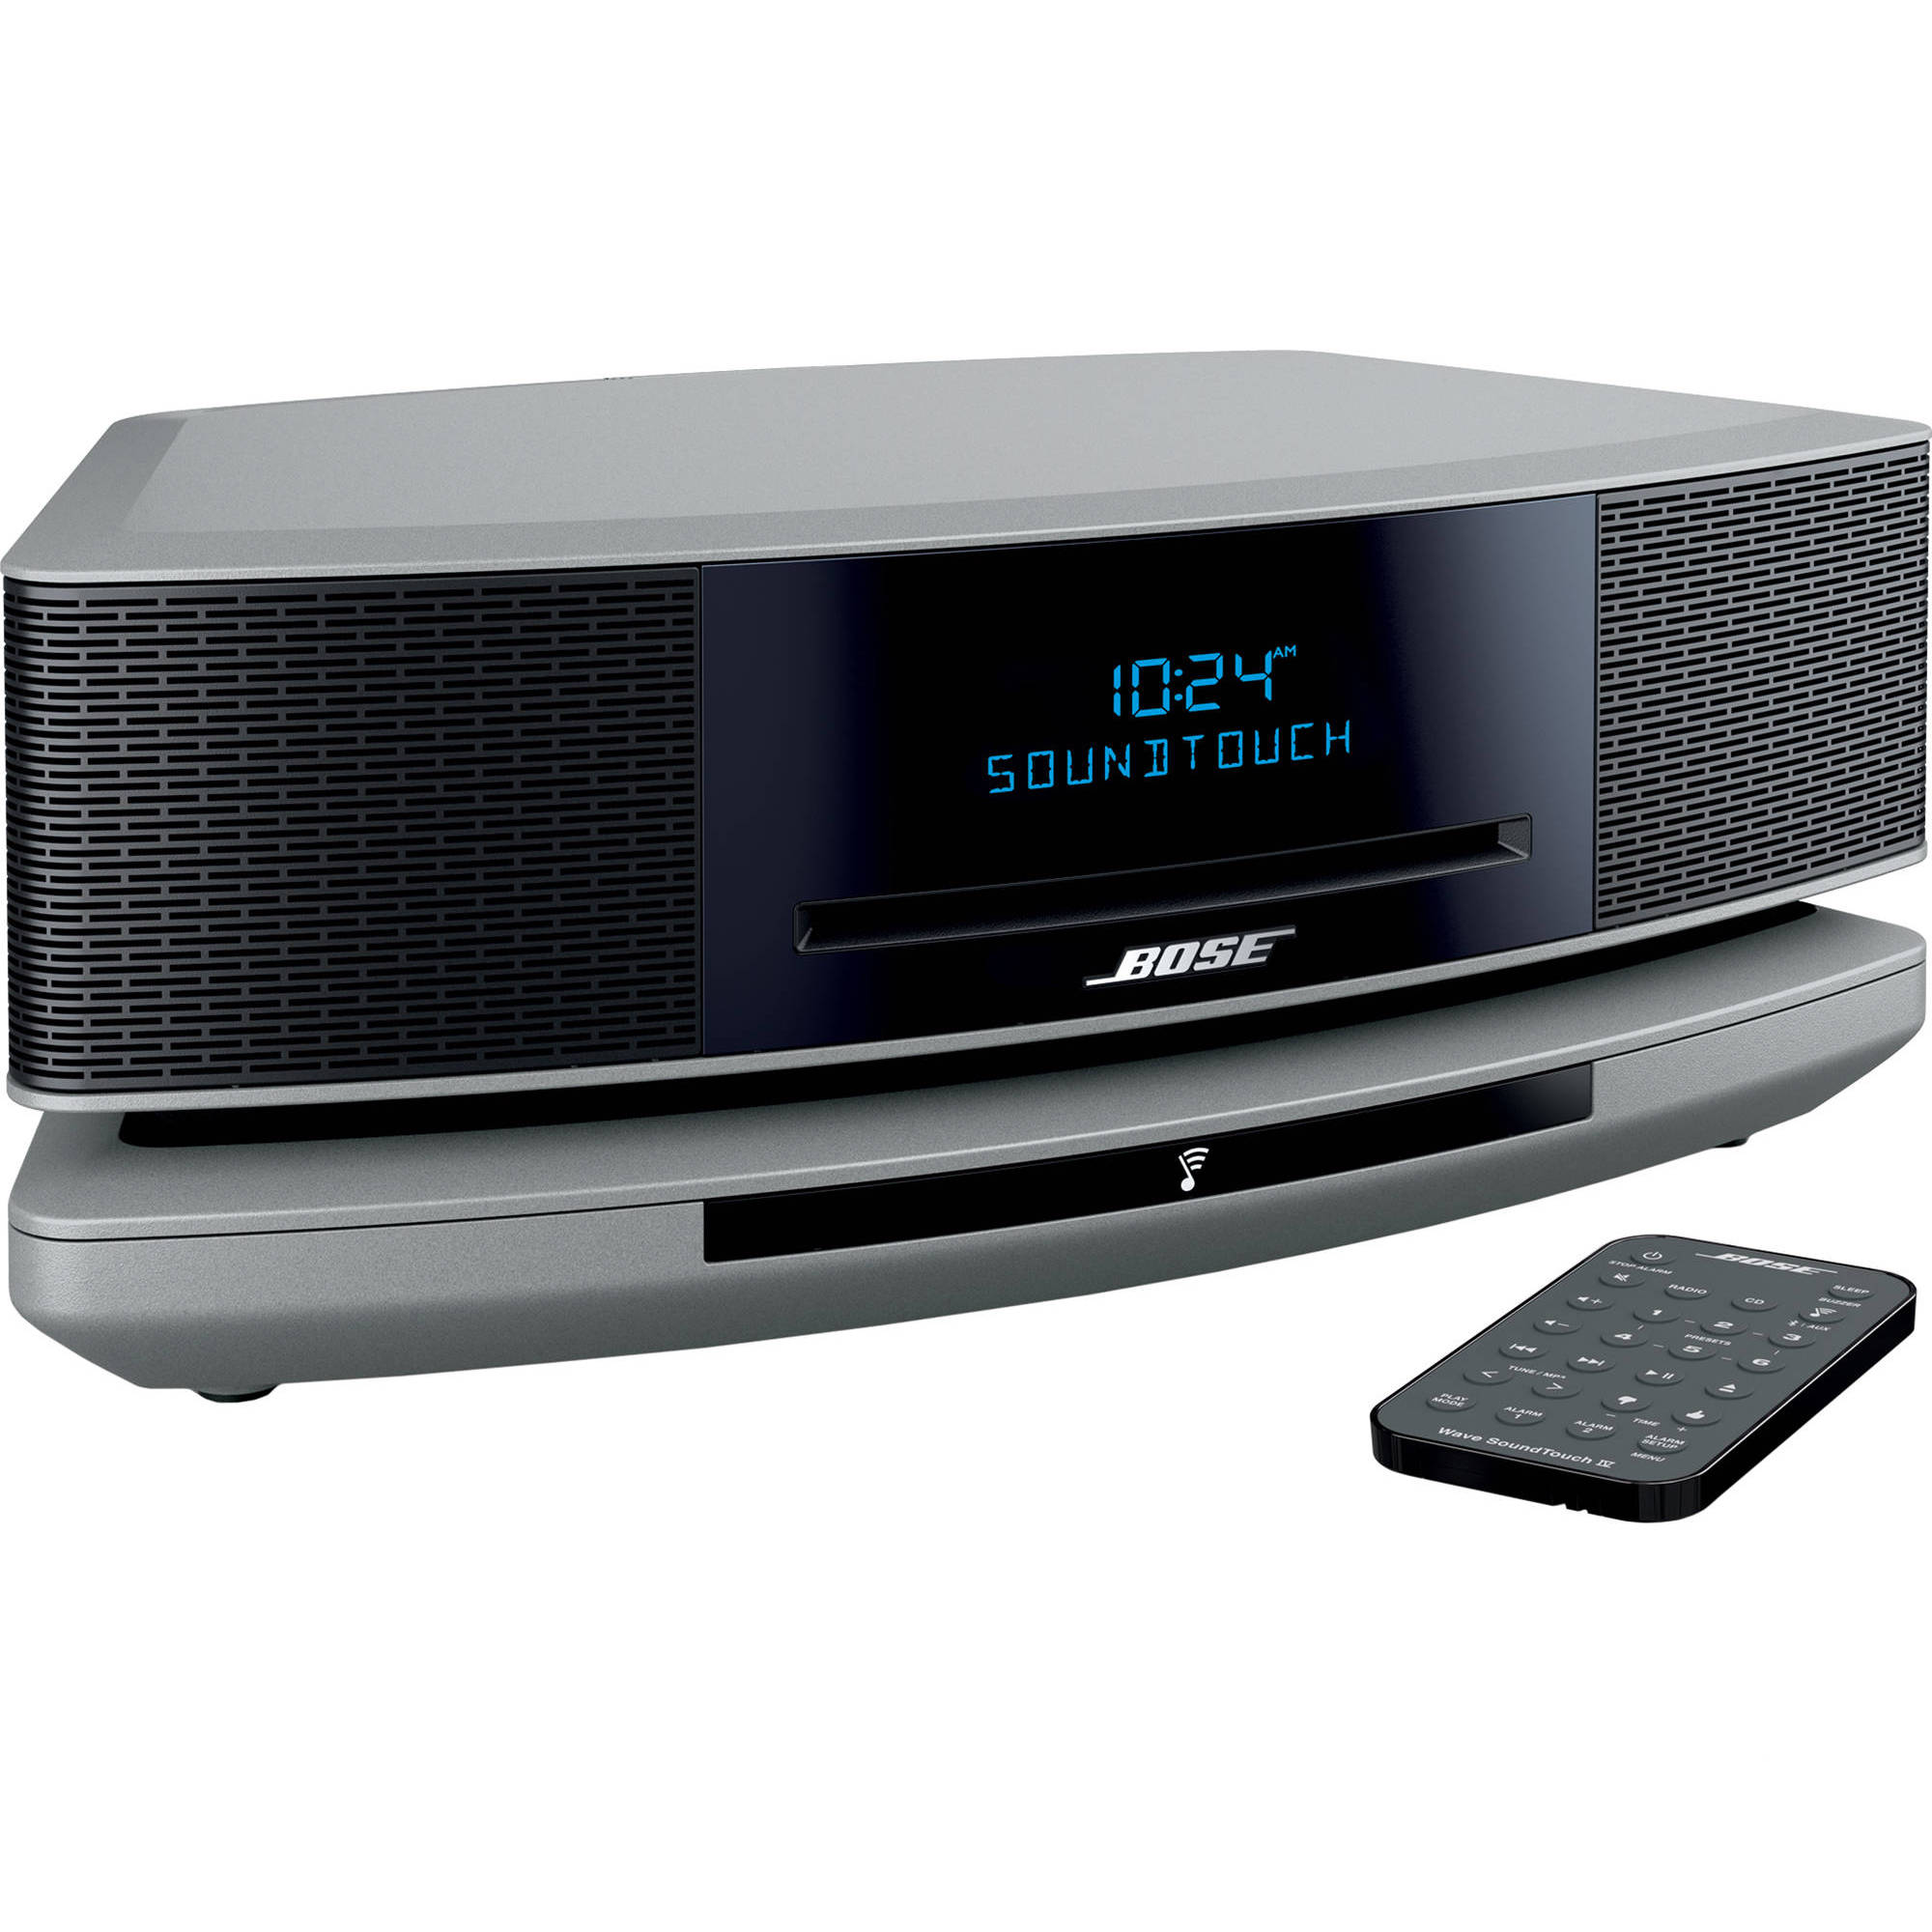 bose wave soundtouch iv price